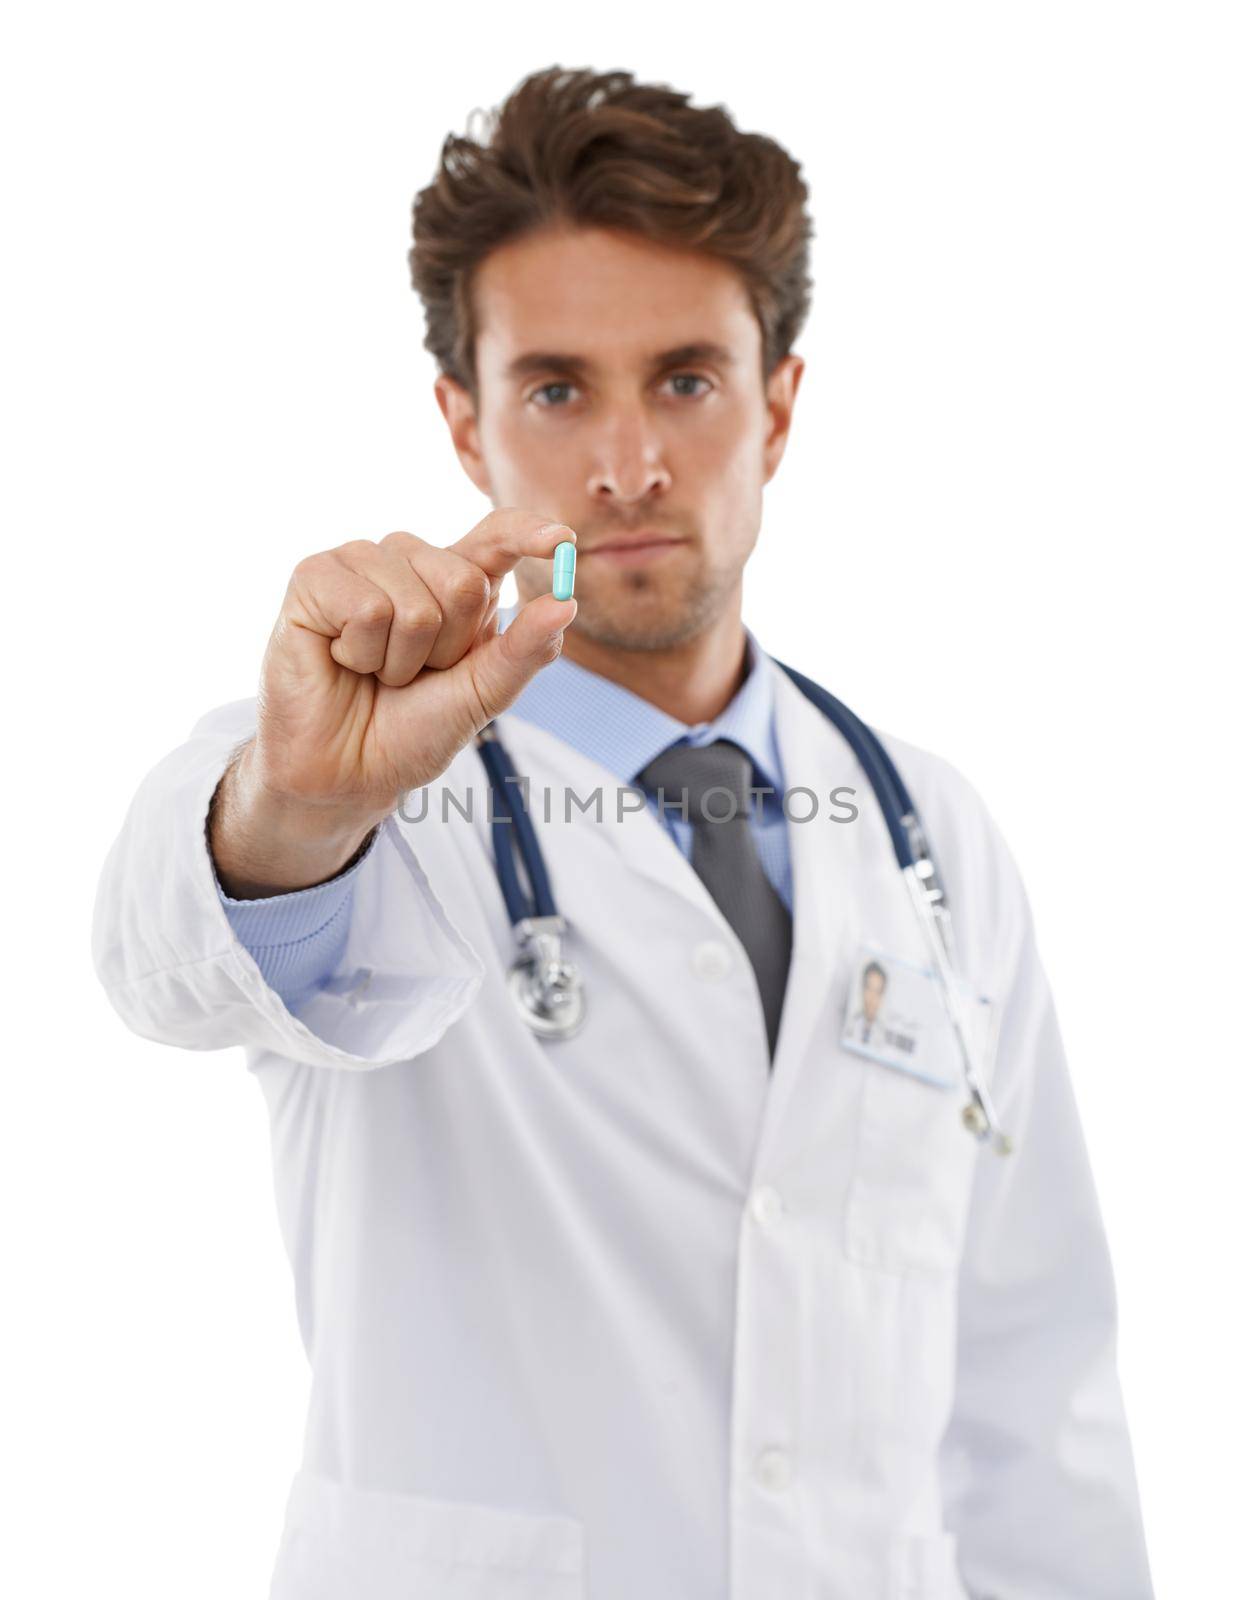 Take this two times daily. Studio shot of a serious-looking young doctor holding a pill up to the camera